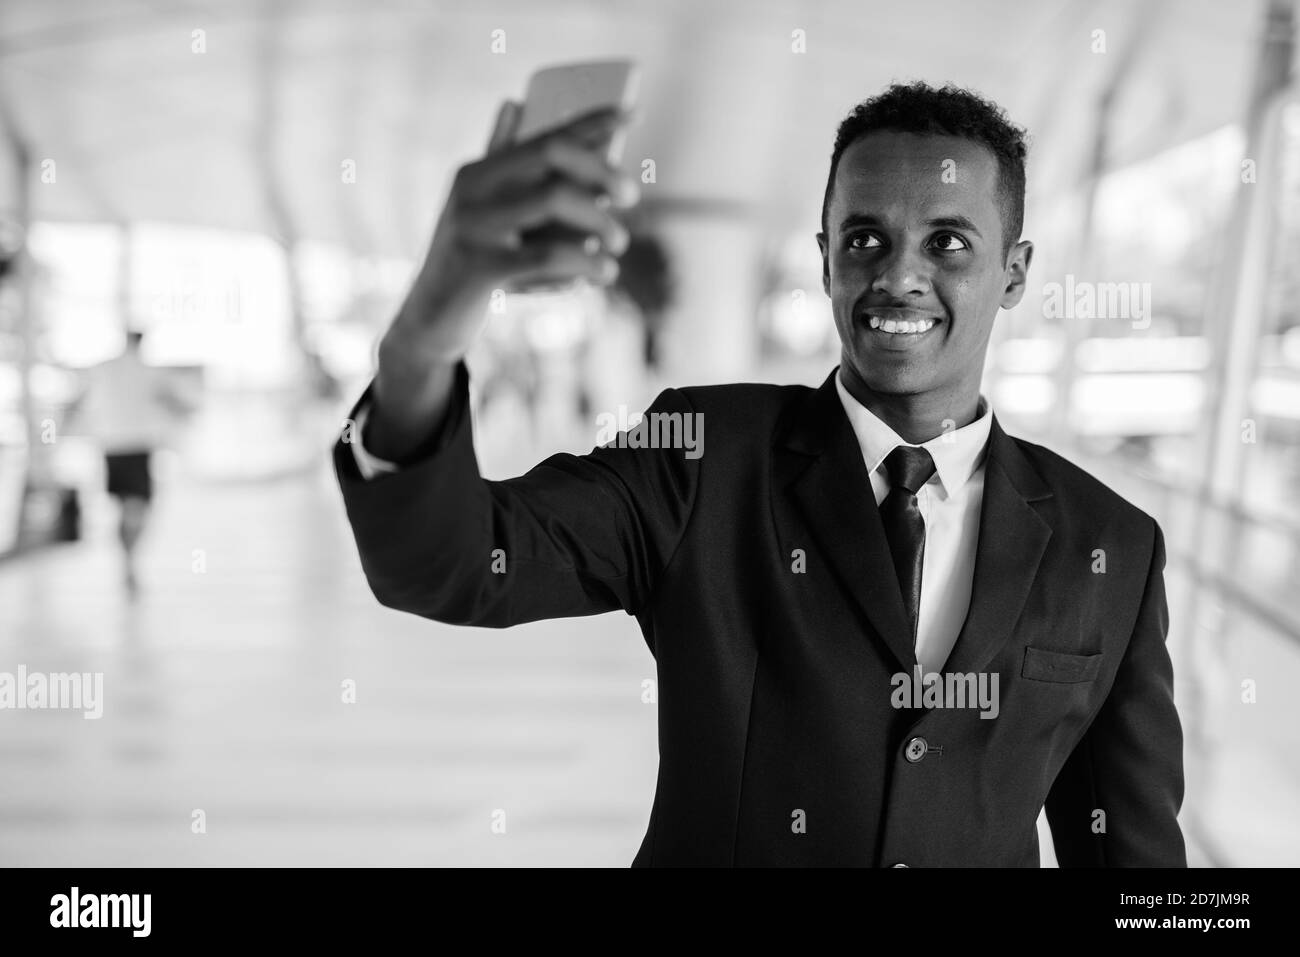 Young African businessman in suit exploring the city Stock Photo